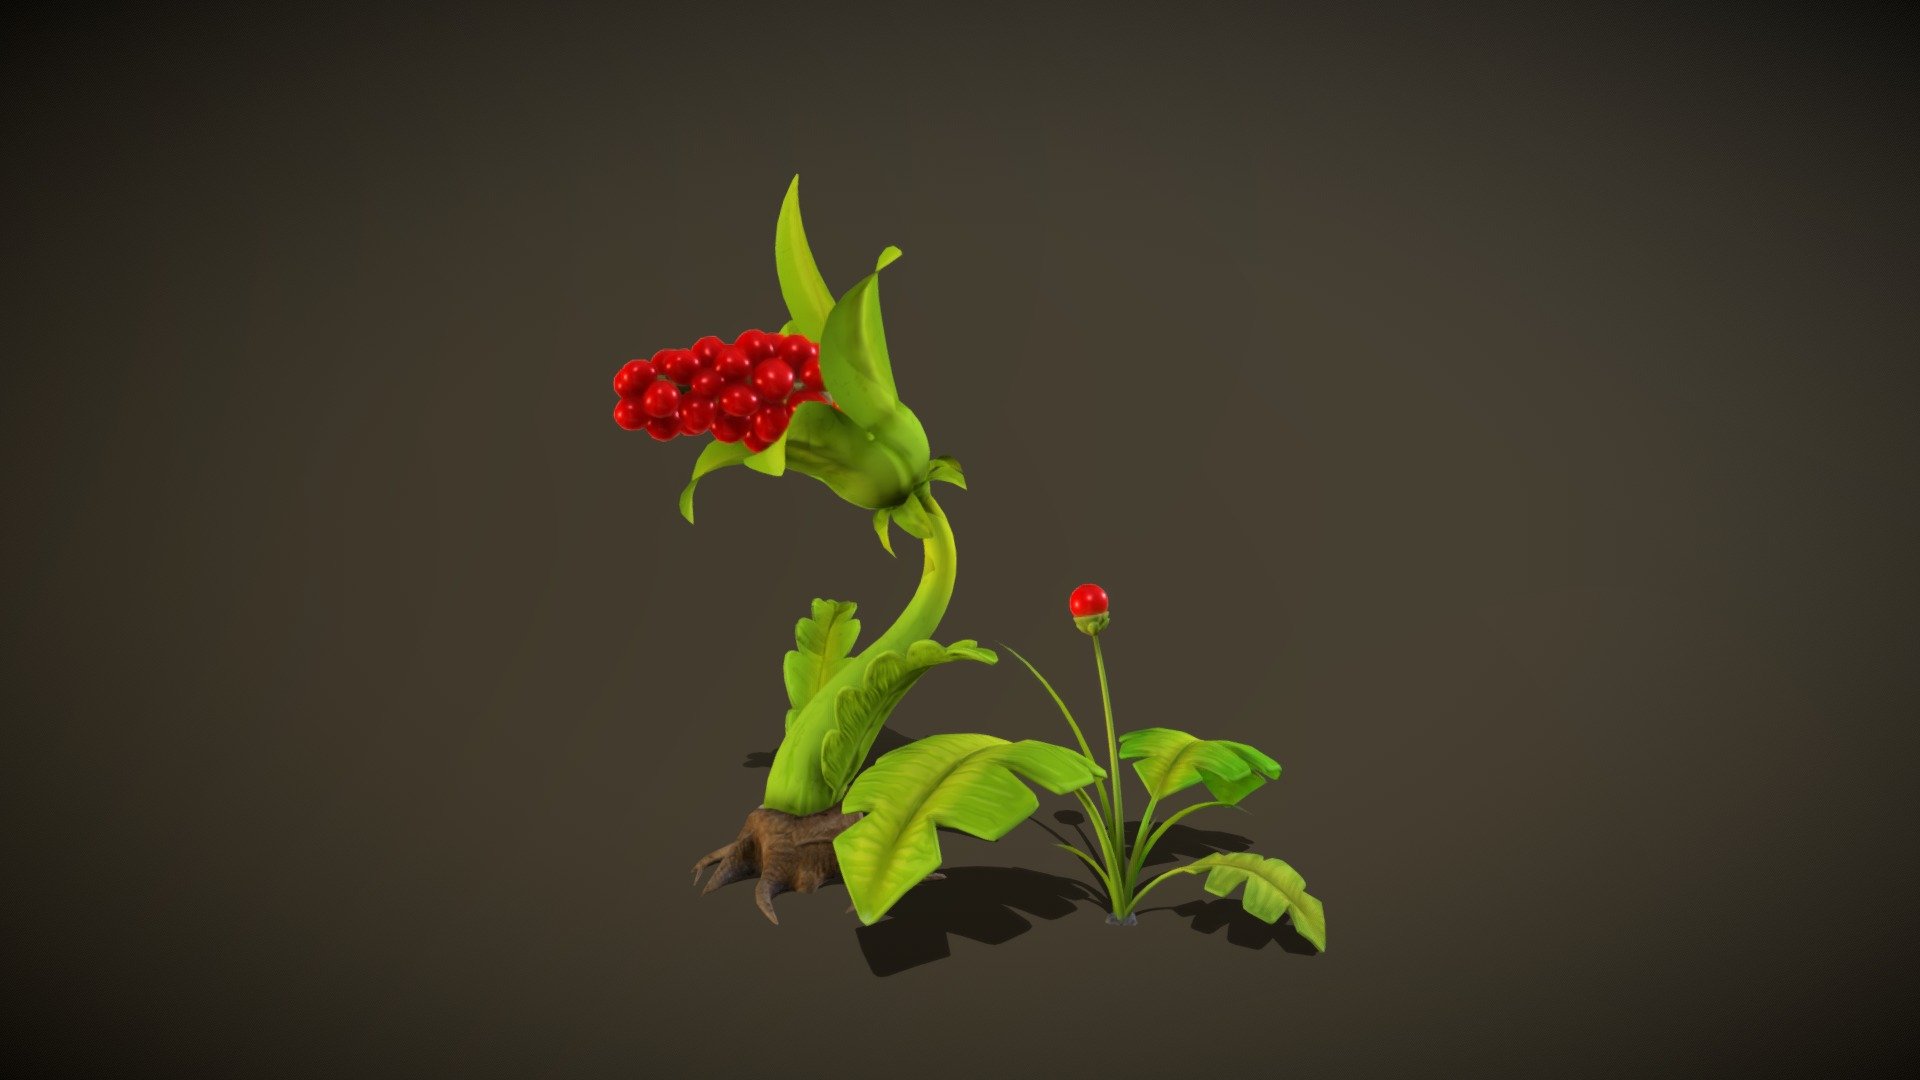 Stylized low-poly plants (Detachable squared fern and berry plant, not rigged, static objects) for game projects on Unity3D (for Universal RP or High Definition RP), Unreal Engine, Godot engine, etc. It requires a double-sided type of shader rendering for grass and small leaves. Both of them have PBR oriented textures (Diffuse texture, Roughness texture, Normal map, AO texture),with OpenGL normals (2048 x 2048 px).

Squared fern has 3,704 triangles and 11,112 vertices. Berry plant has 13,065 triangles and 39,195 vertices.

To render berries in other 3d renders like in blender EEVEE you have to apply your own shader with Fresnel effect 3d model